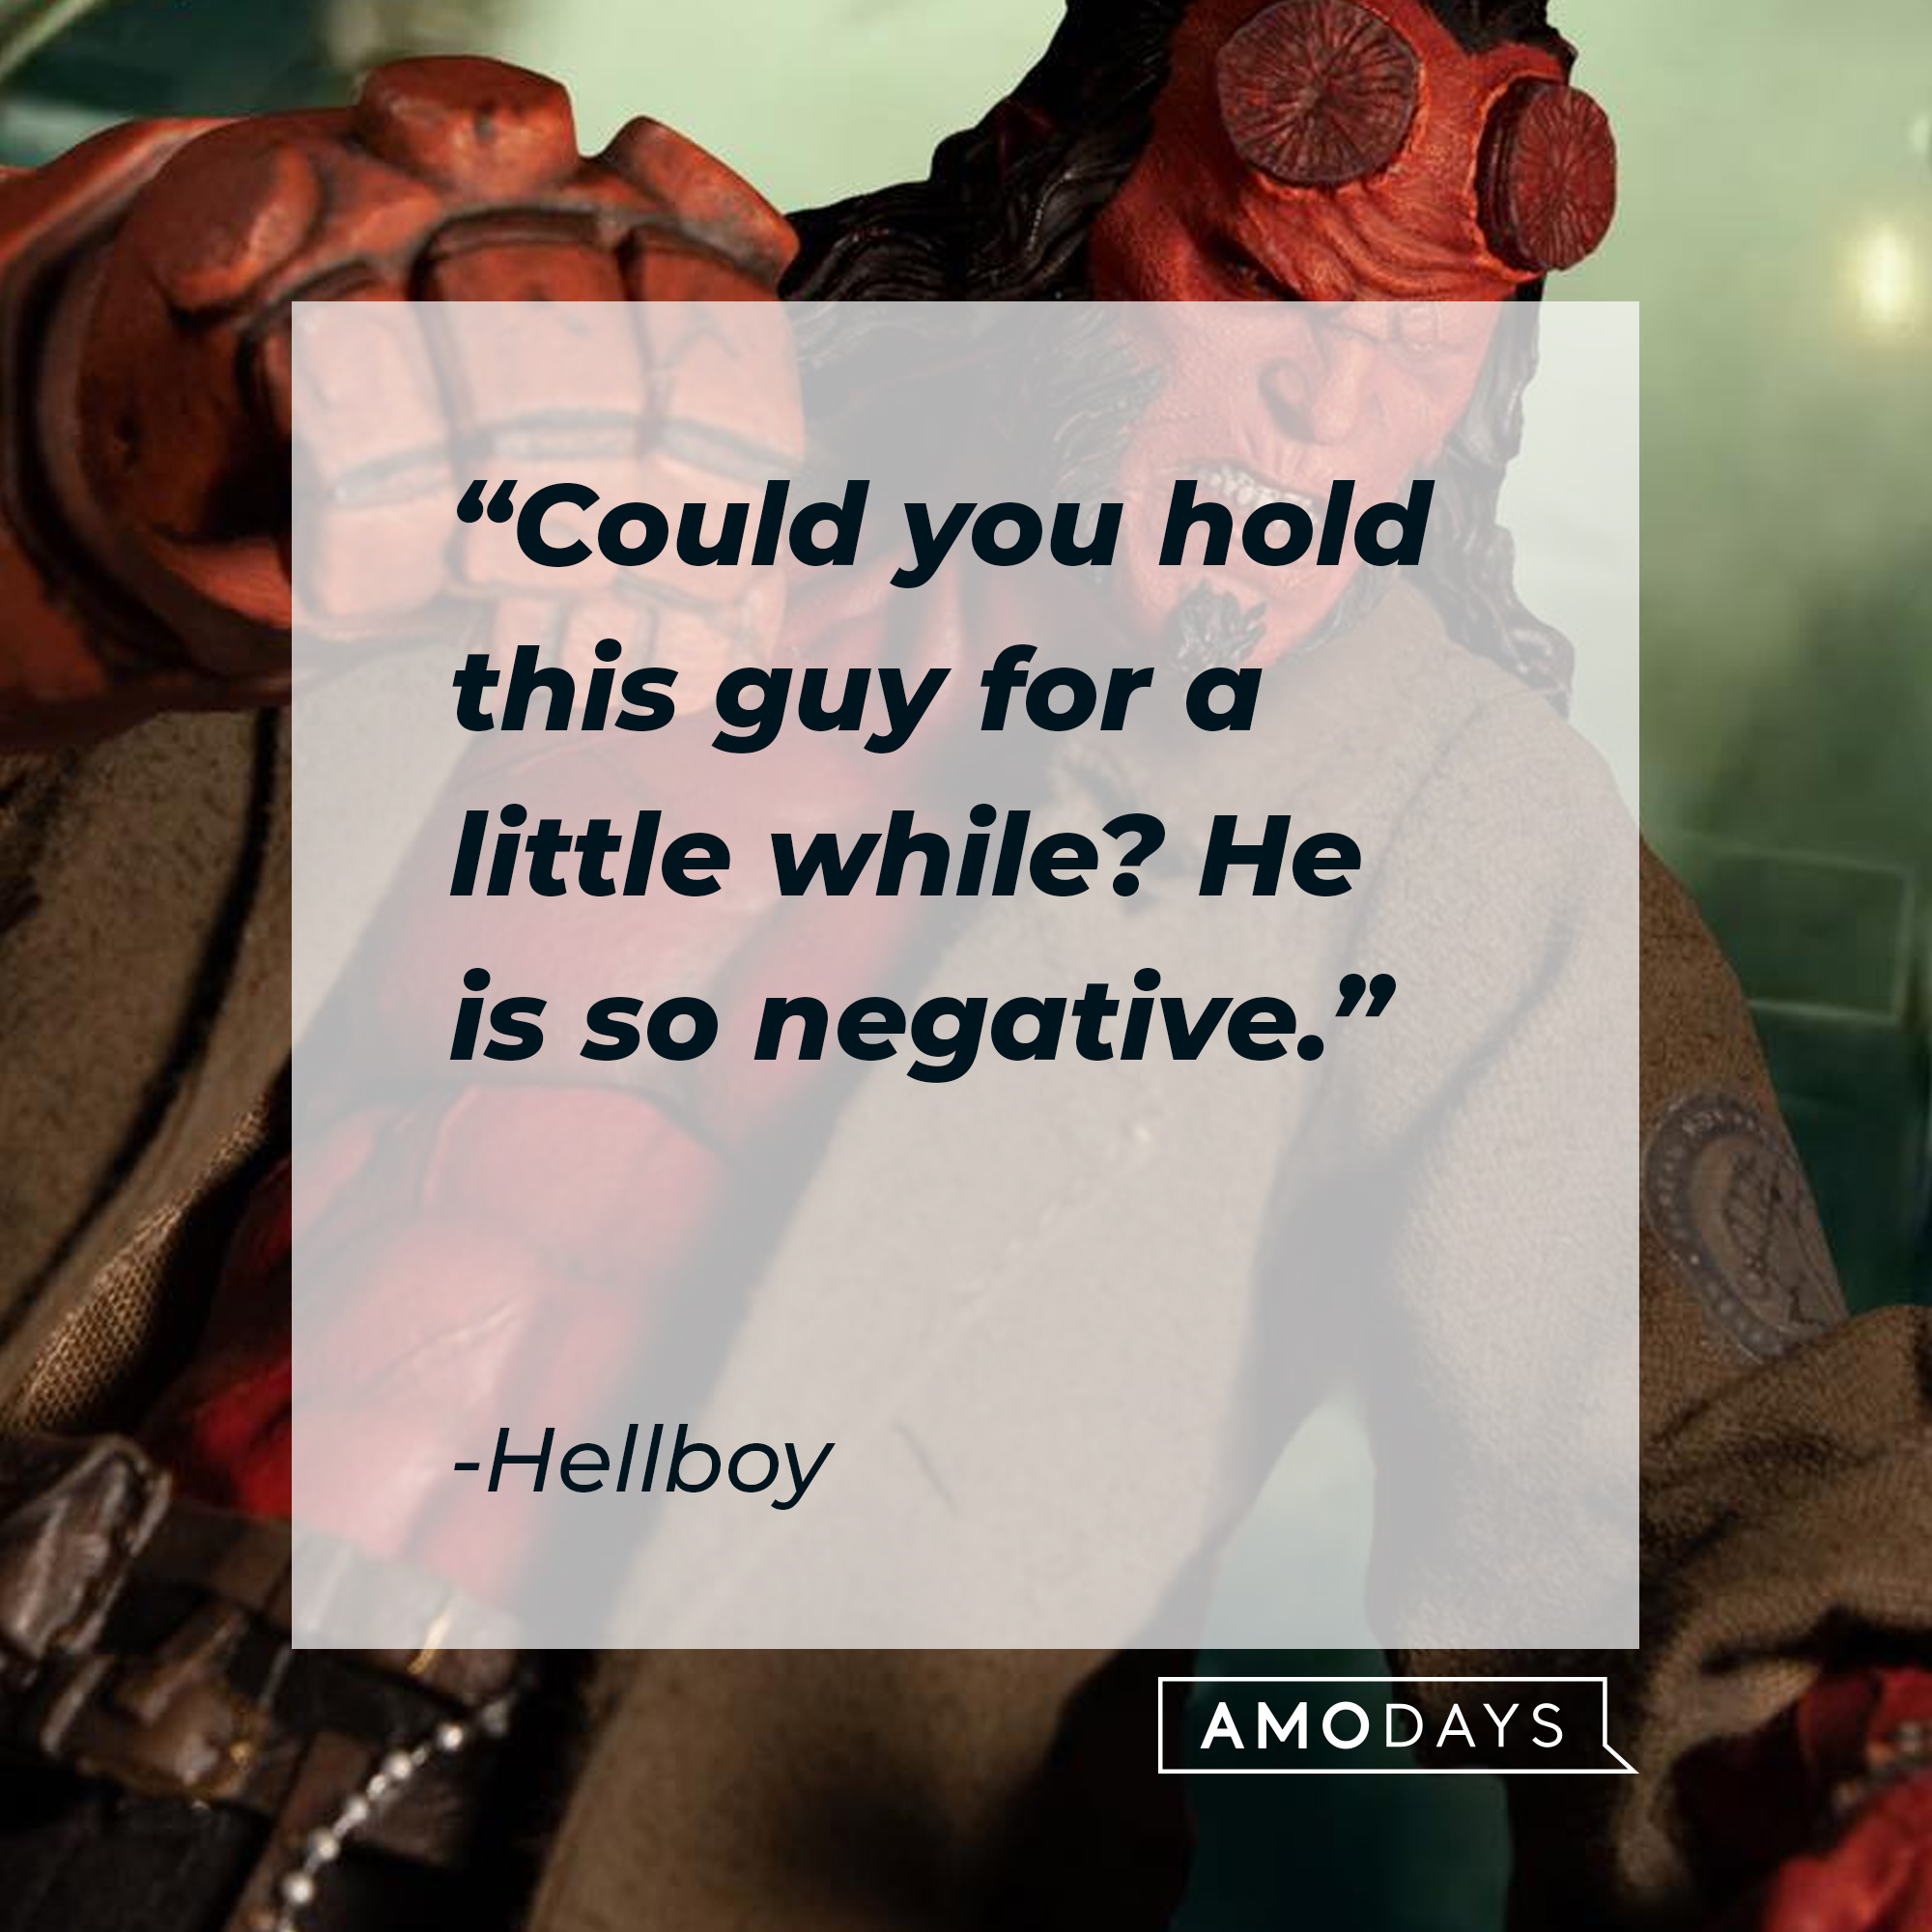 Hellboy's quote: "Could you hold this guy for a little while? He is so negative." | Source: facebook.com/hellboymovie